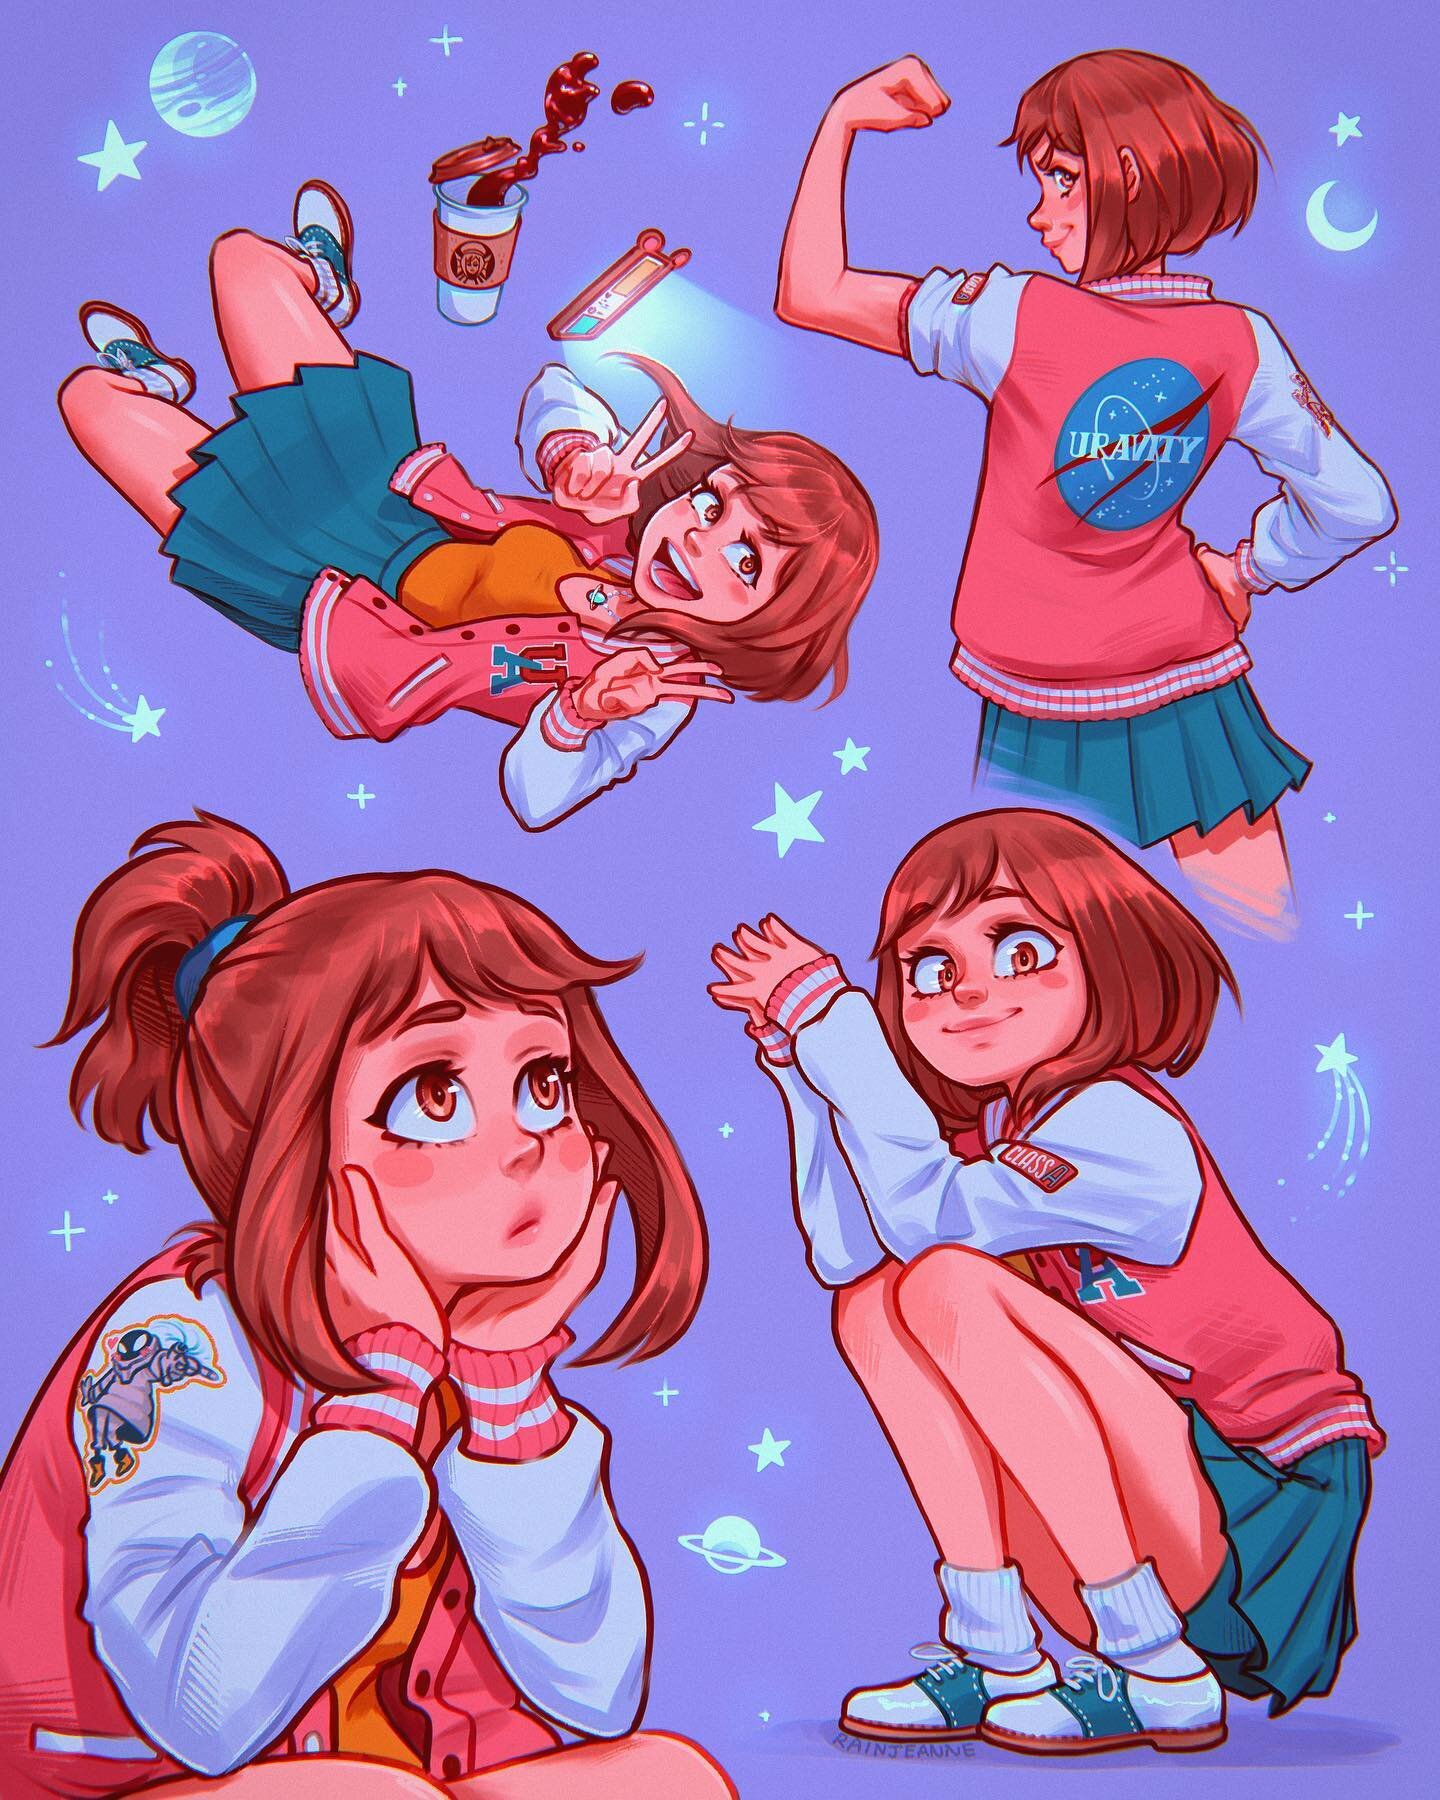 Uraraka in a varsity jacket because I&rsquo;m obsessed with those (ﾉ&acute;ヮ&acute;)ﾉ*: ･ﾟ
.
(Also, new icon maybe?)
.
Oops I missed my posting day by&hellip;a bit (￣▽￣*)ゞ I&rsquo;ve been super-stressing about a couple of projects (coming soon!)
.
Tb